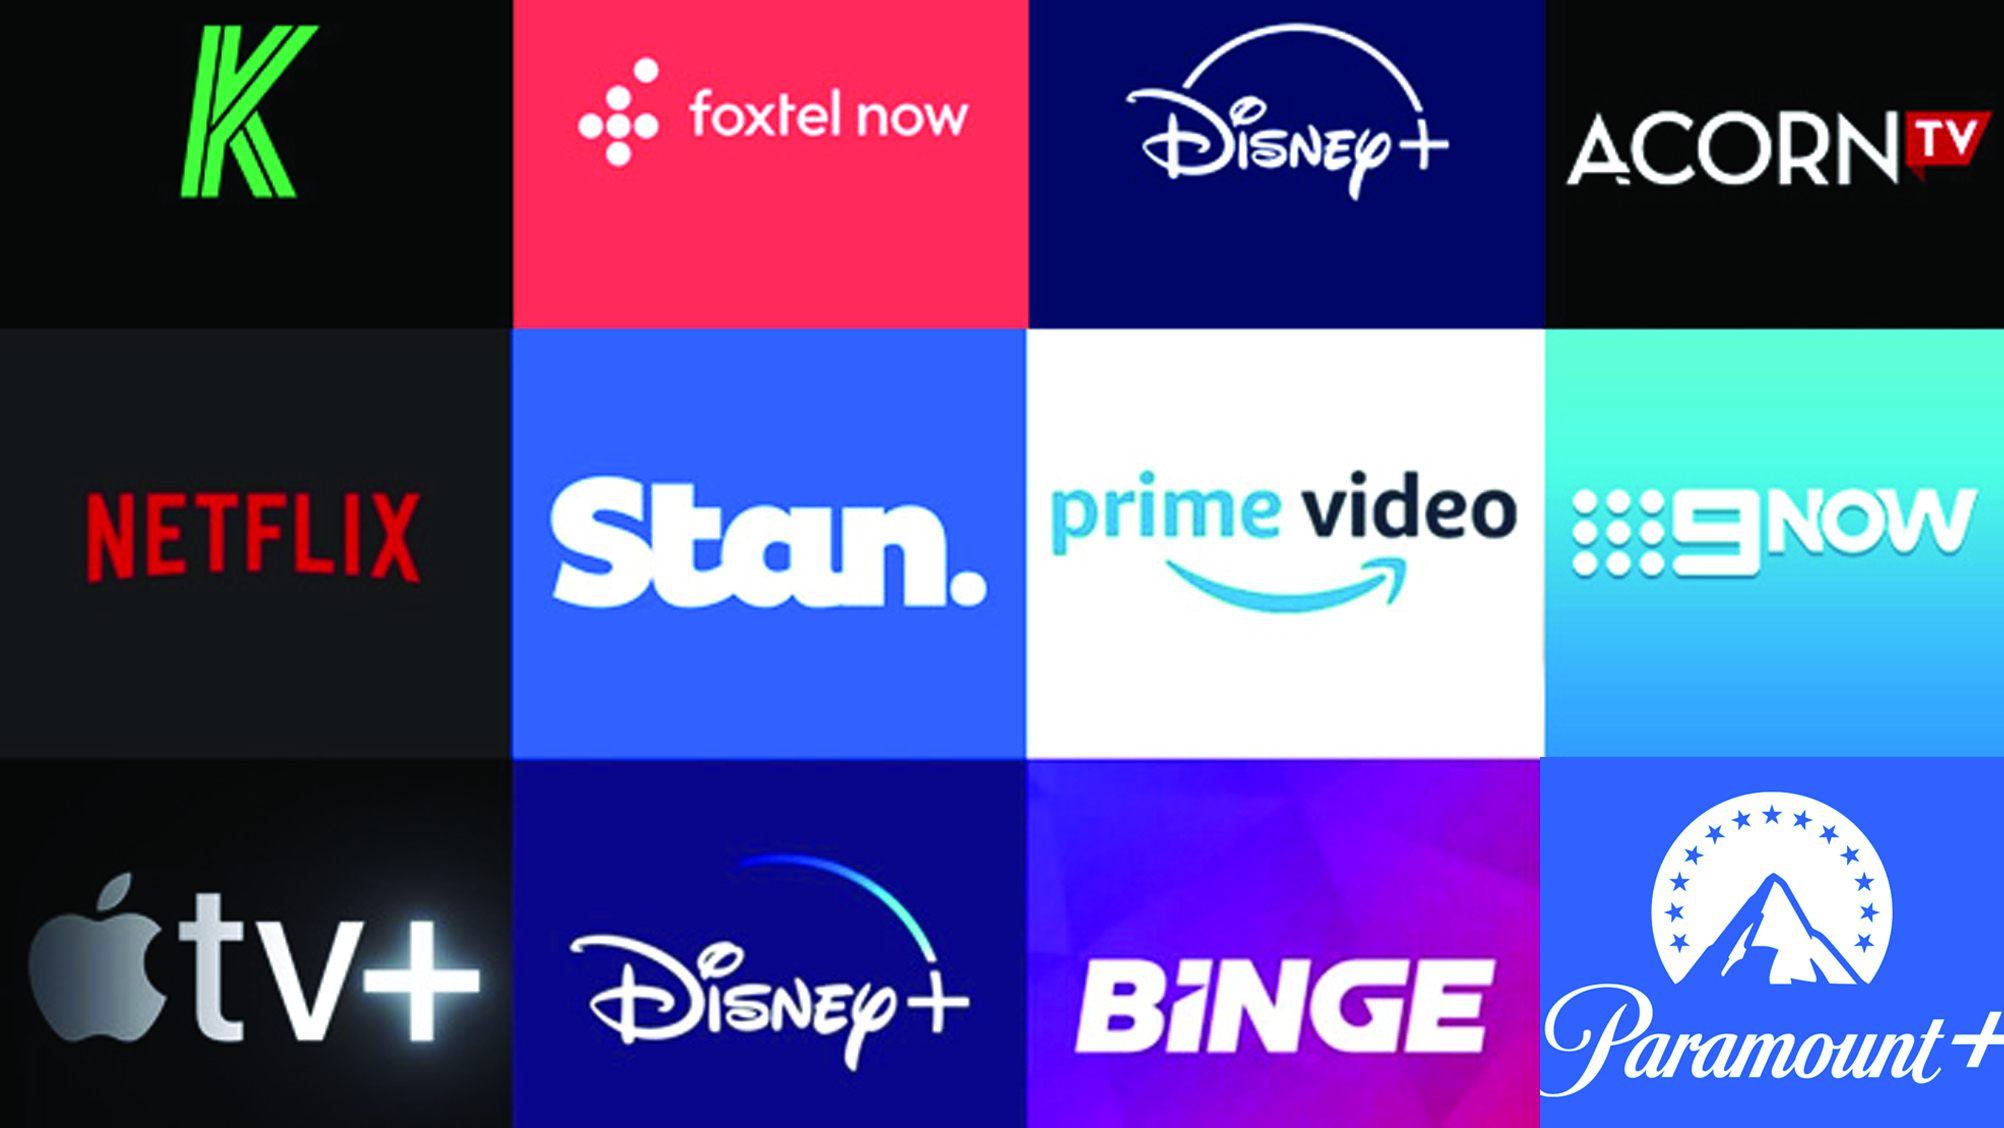 Guide to every streaming platform in Australia: costs, pros and cons